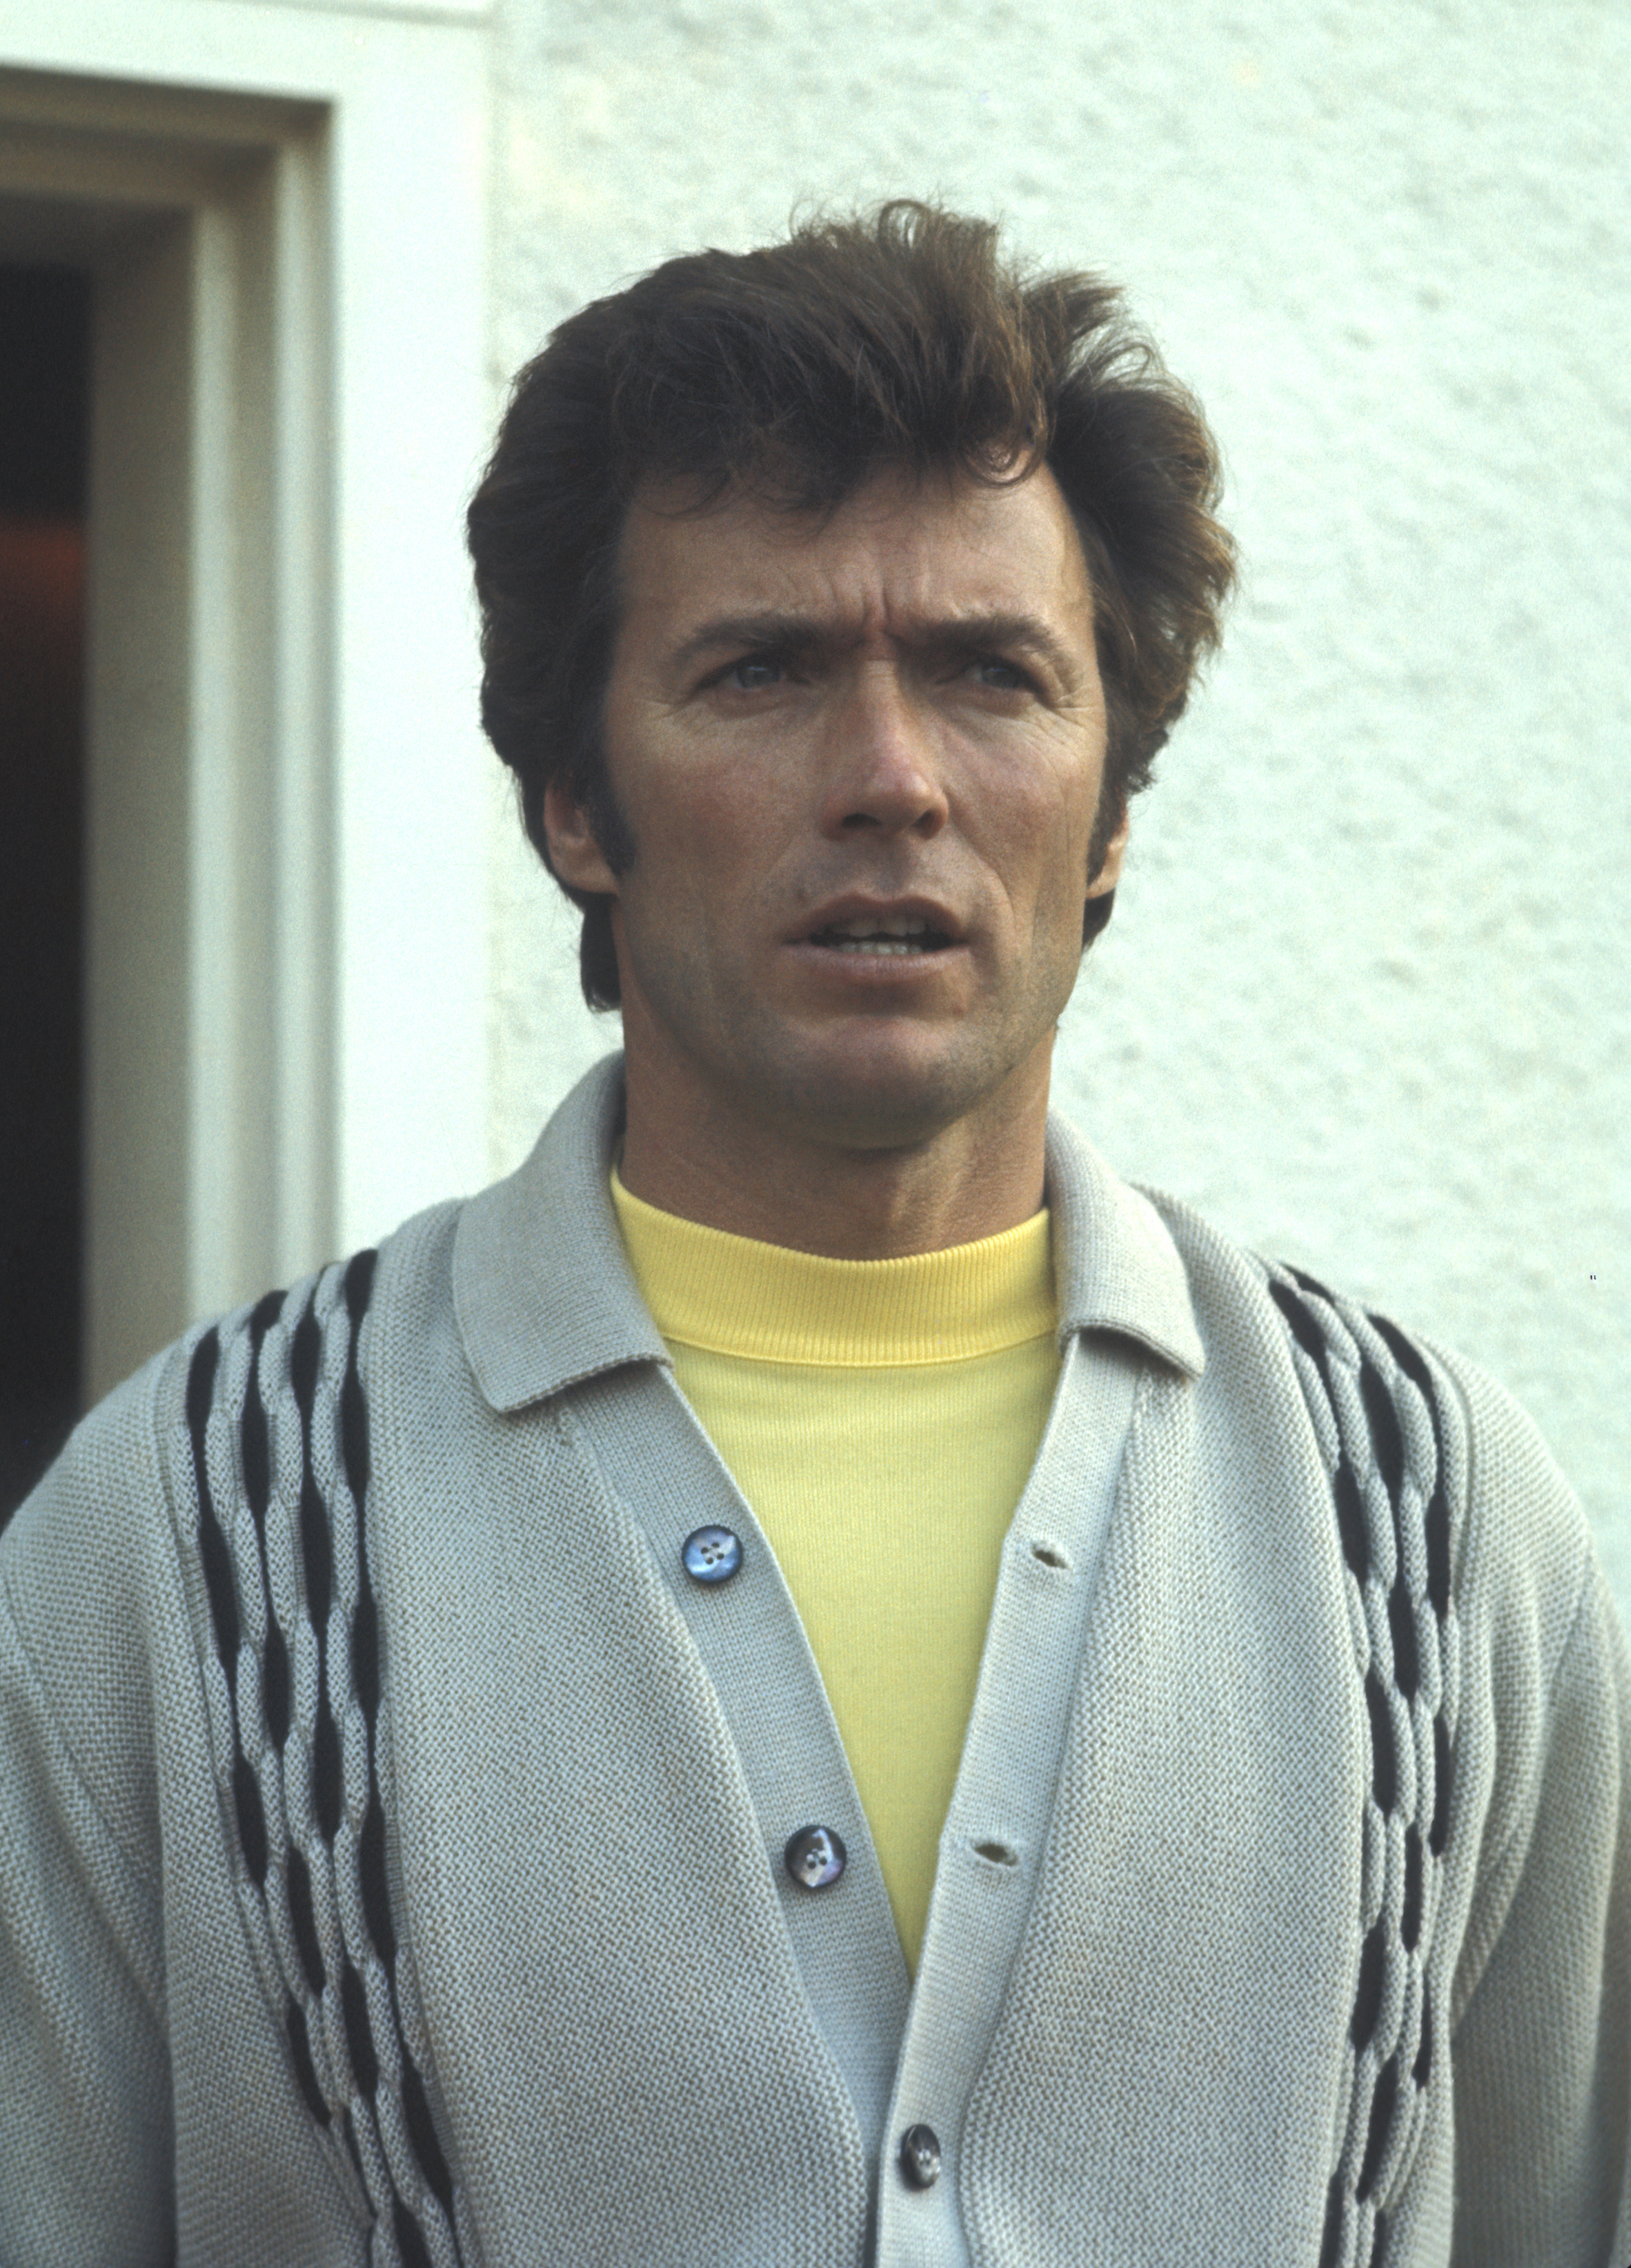 Clint Eastwood during 29th Annual Bing Crosby National Pro-Am Golf Tournament & Clambake Weekend at Pebble Beach in Monterey, California on January 22, 1970. | Source: Getty Images